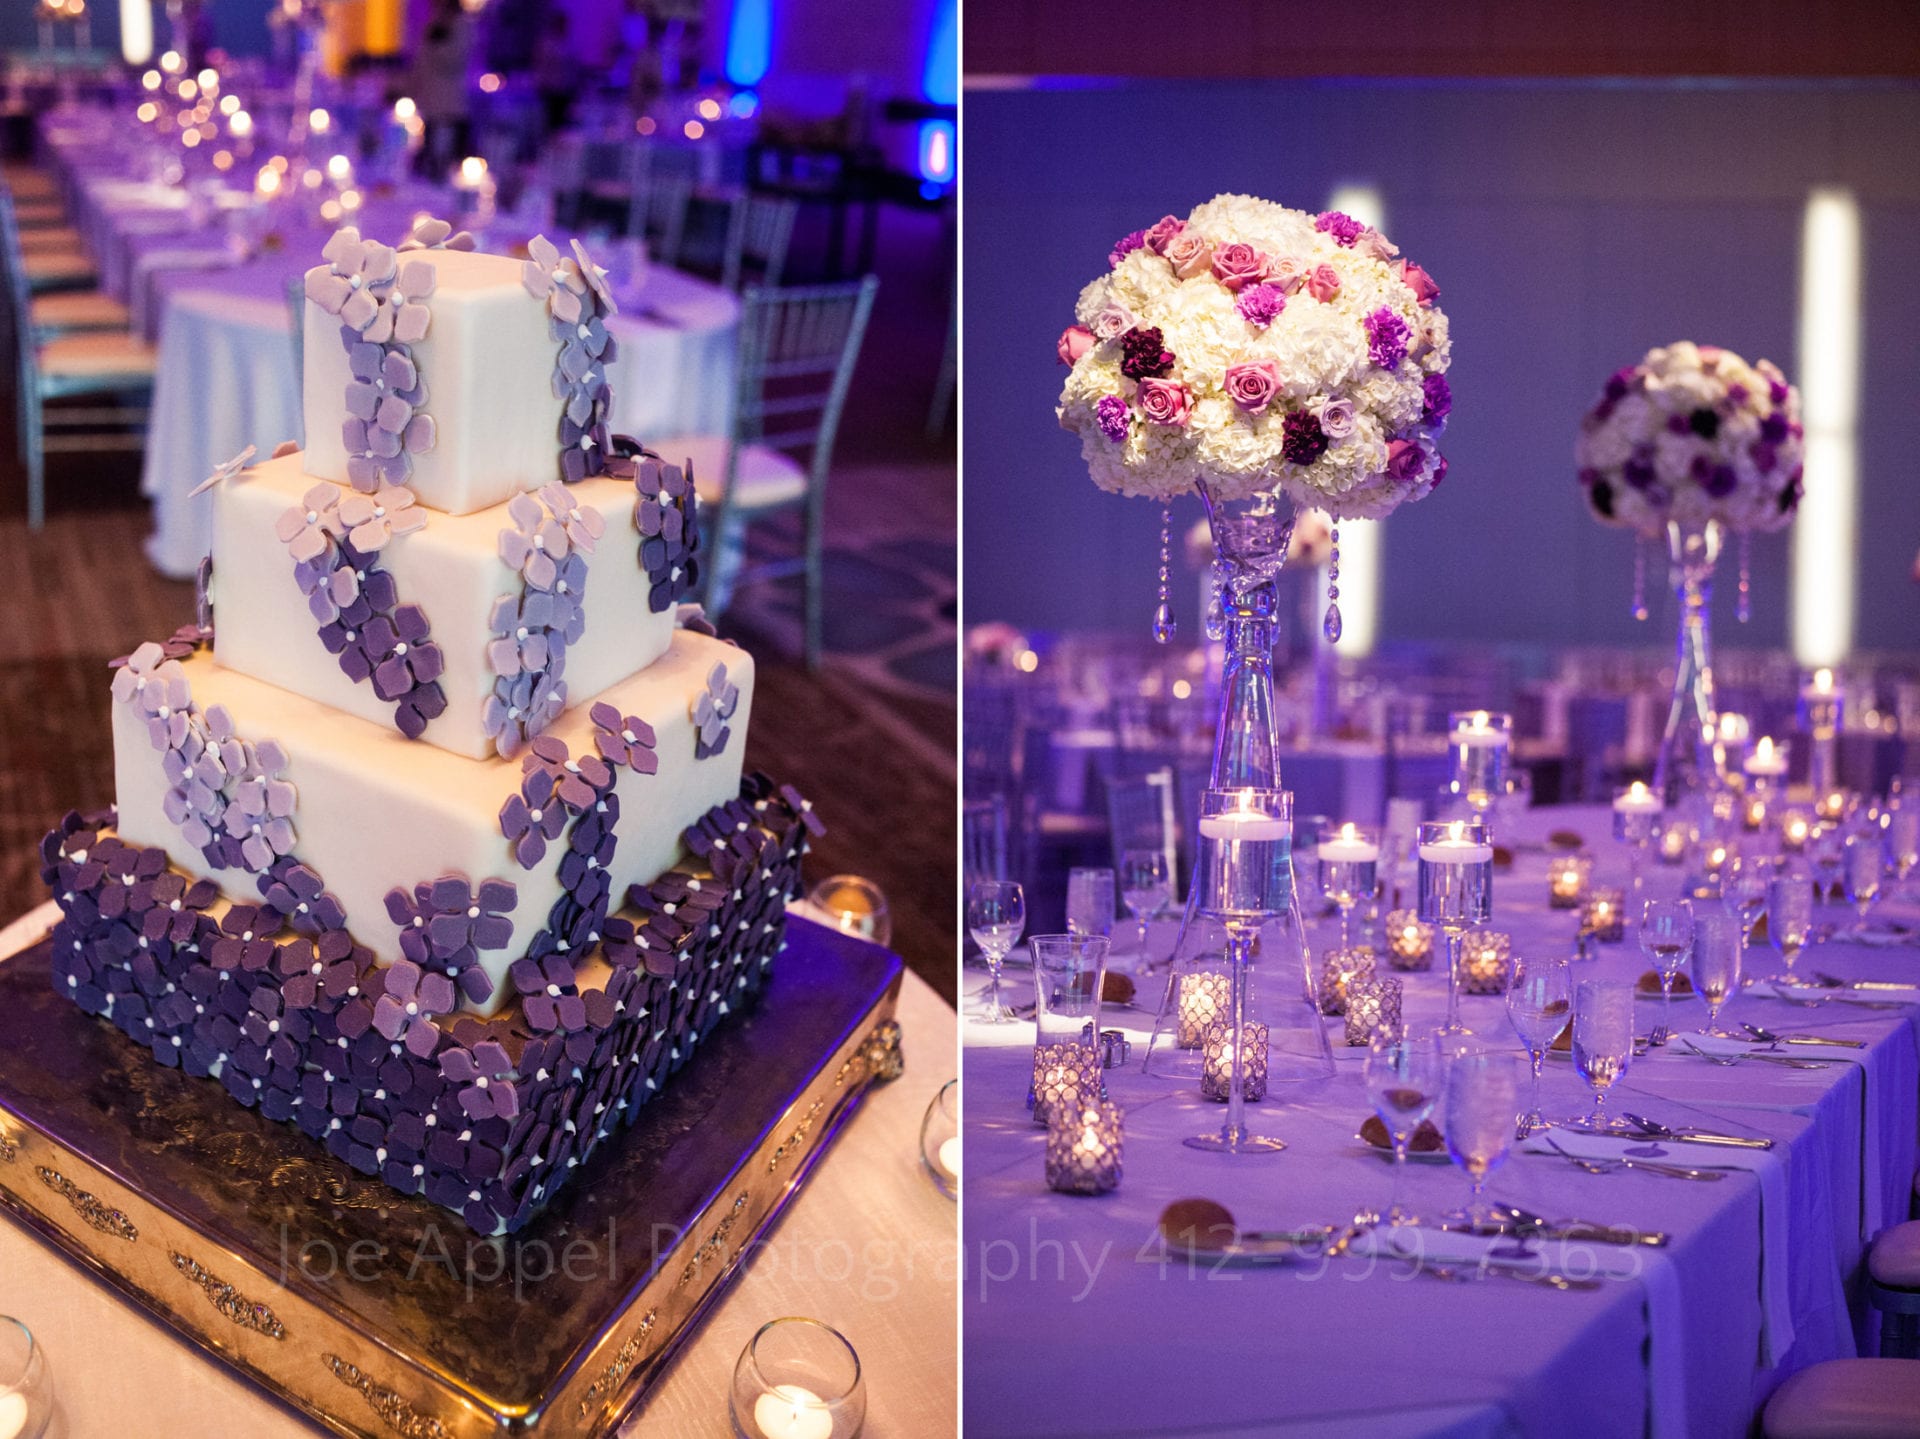 A purple-accented wedding cake with square tiers. A purple table cloth with large bouqets Fairmont Hotel Pittsburgh Weddings